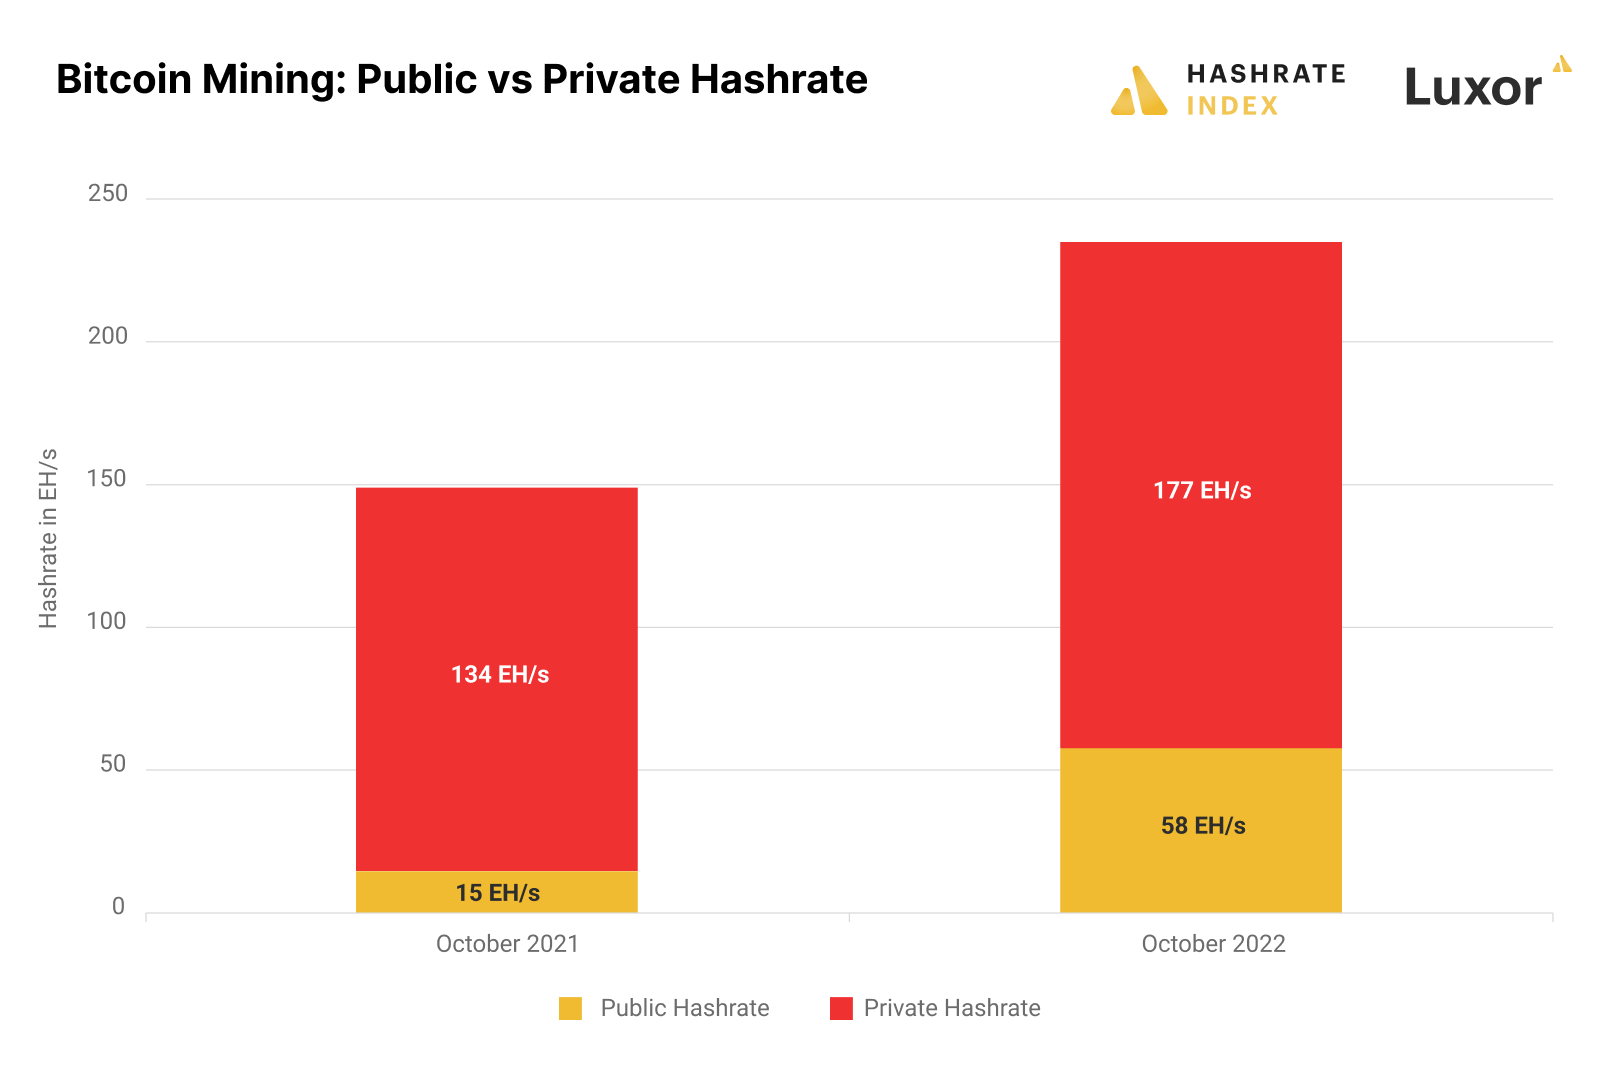 hash rate